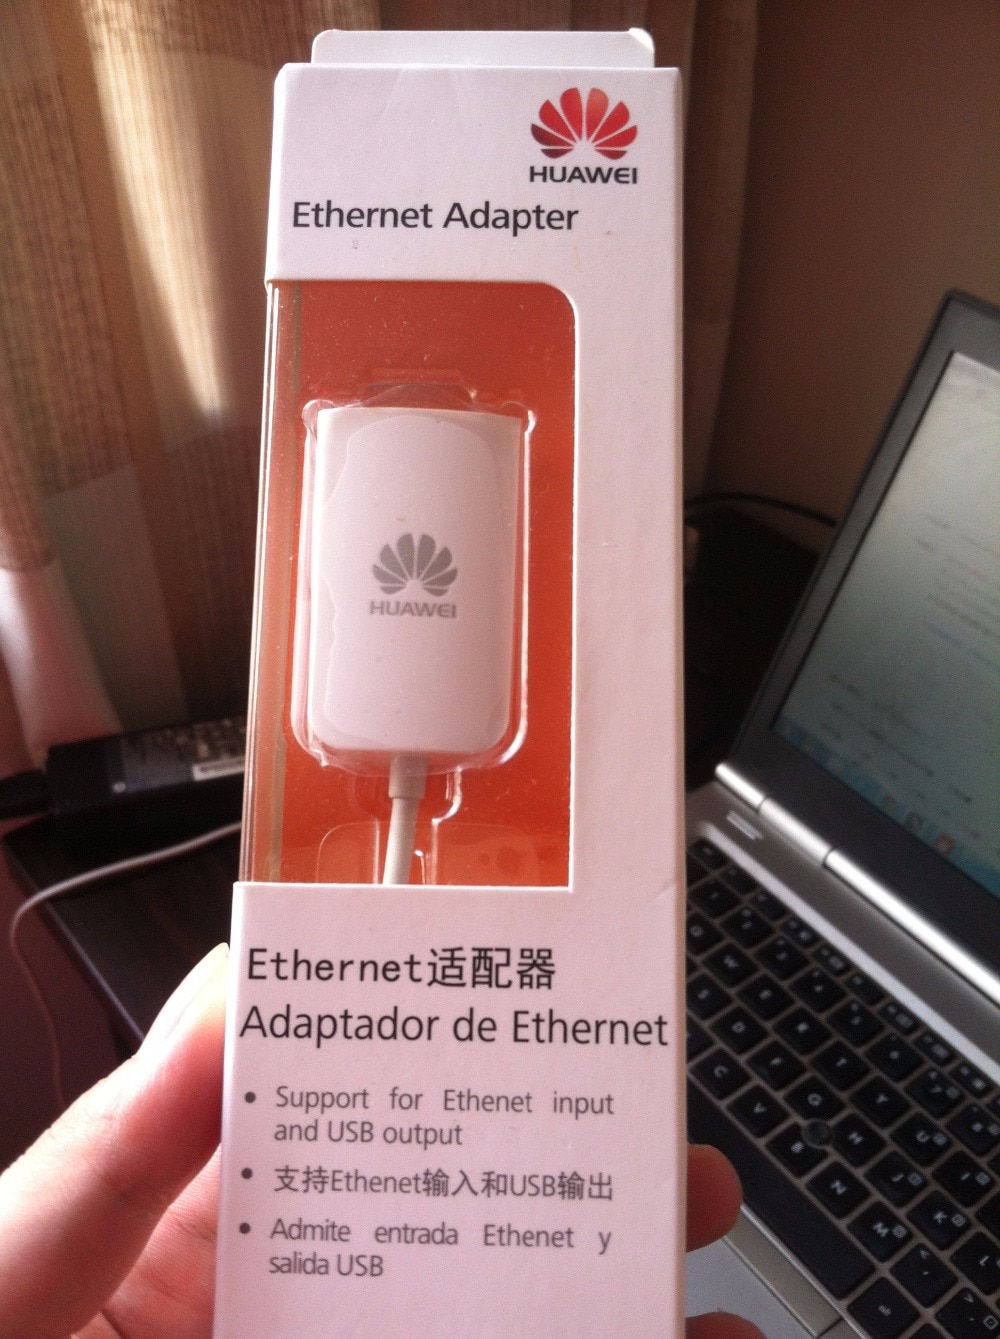 Huawei AF18 Ethernet Adapter voor Huawei E5786 LTE MiFi Router